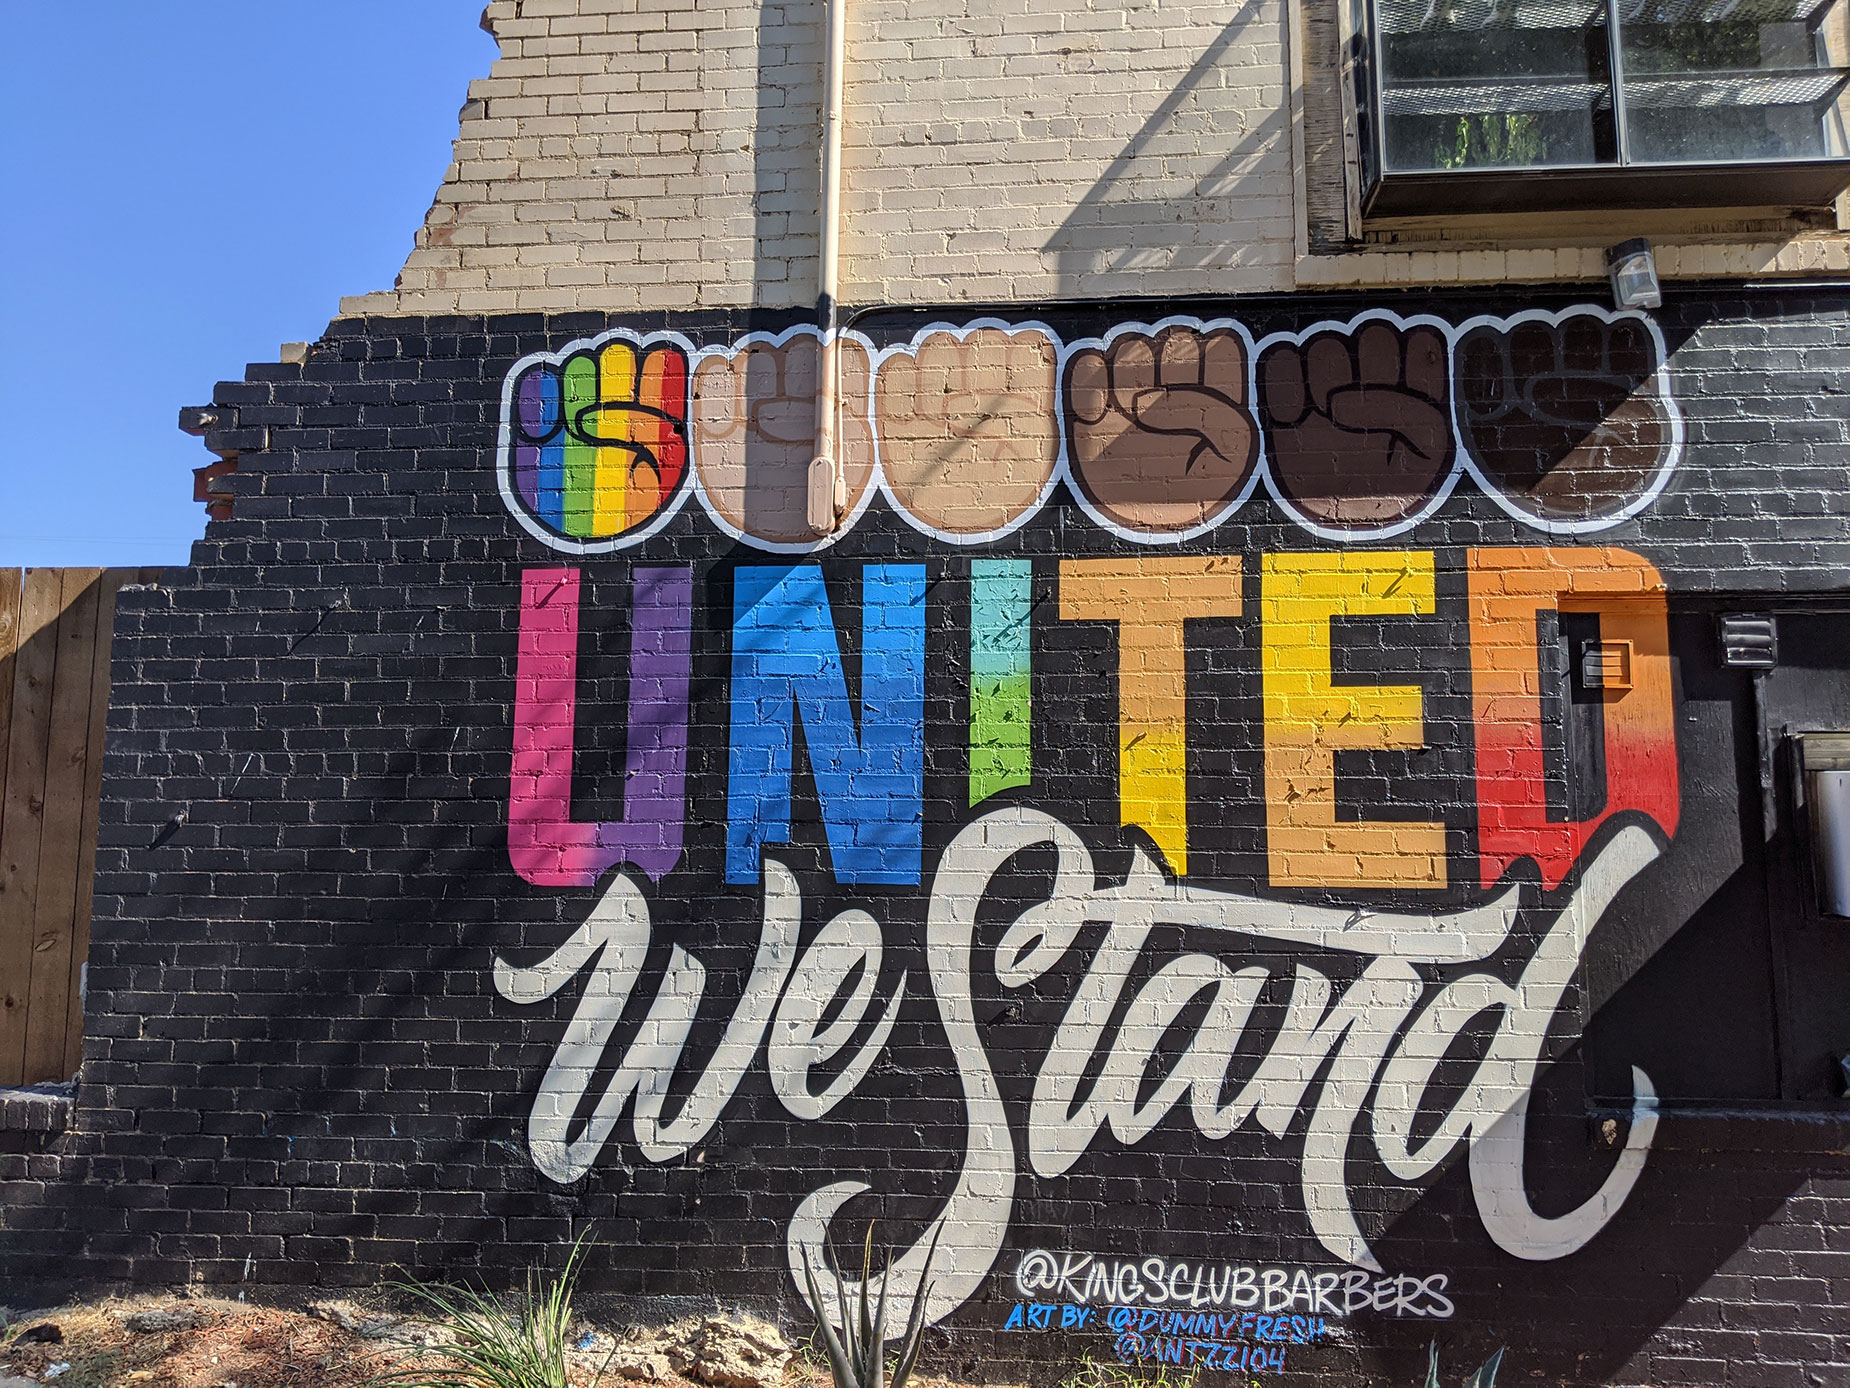 United We Stand Mural at the Kings Club barber shop in Dallas' Bishop Arts District.